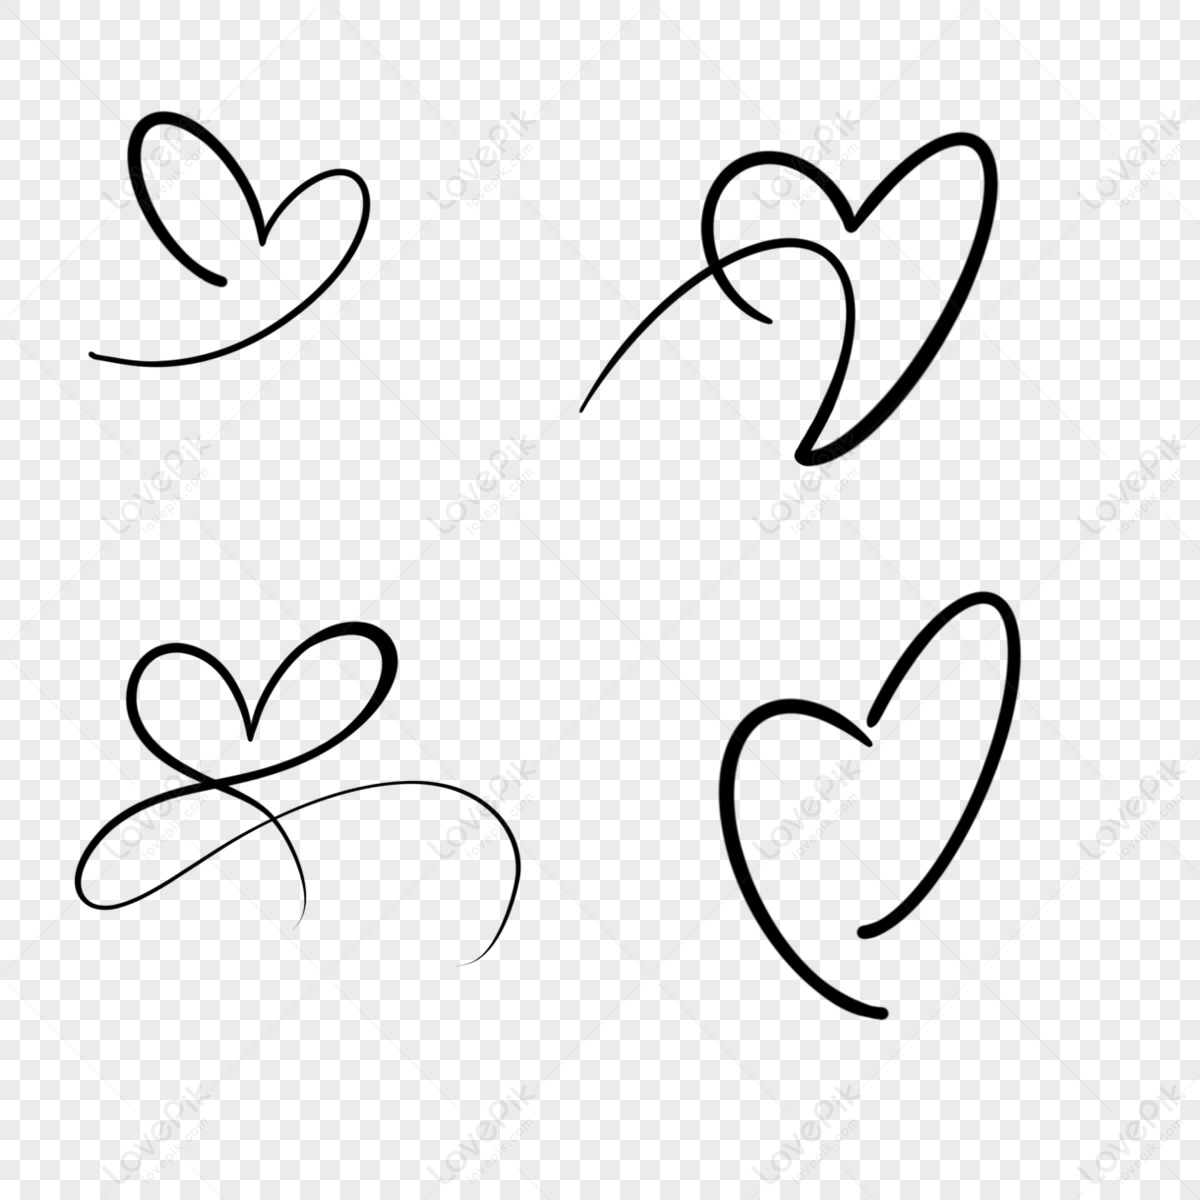 Lovely Graphics PNG Images With Transparent Background | Free Download ...